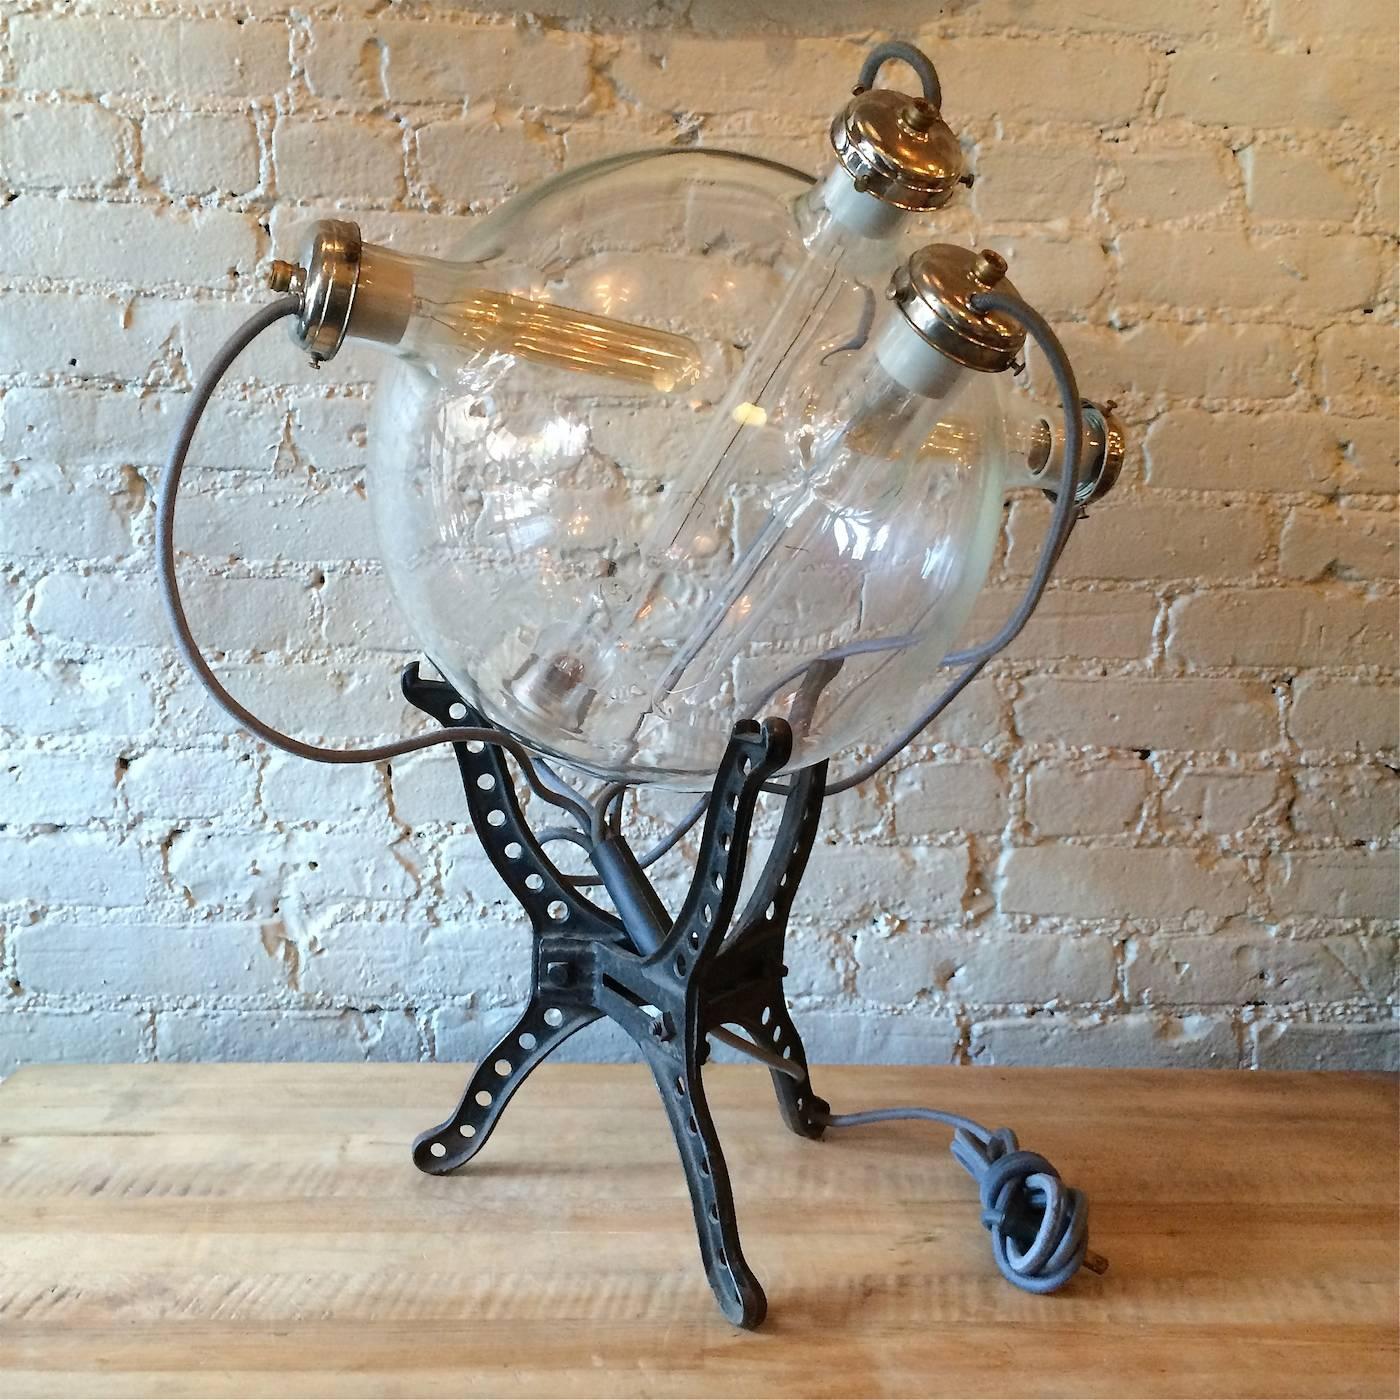 Large-scale, custom, scientific, industrial, sculptural, table lamp with exposed tubular bulbs inside and wiring outside of a large, rare laboratory vessel on a cast iron stand. This lamp is part of the CF Signature Line of custom industrial